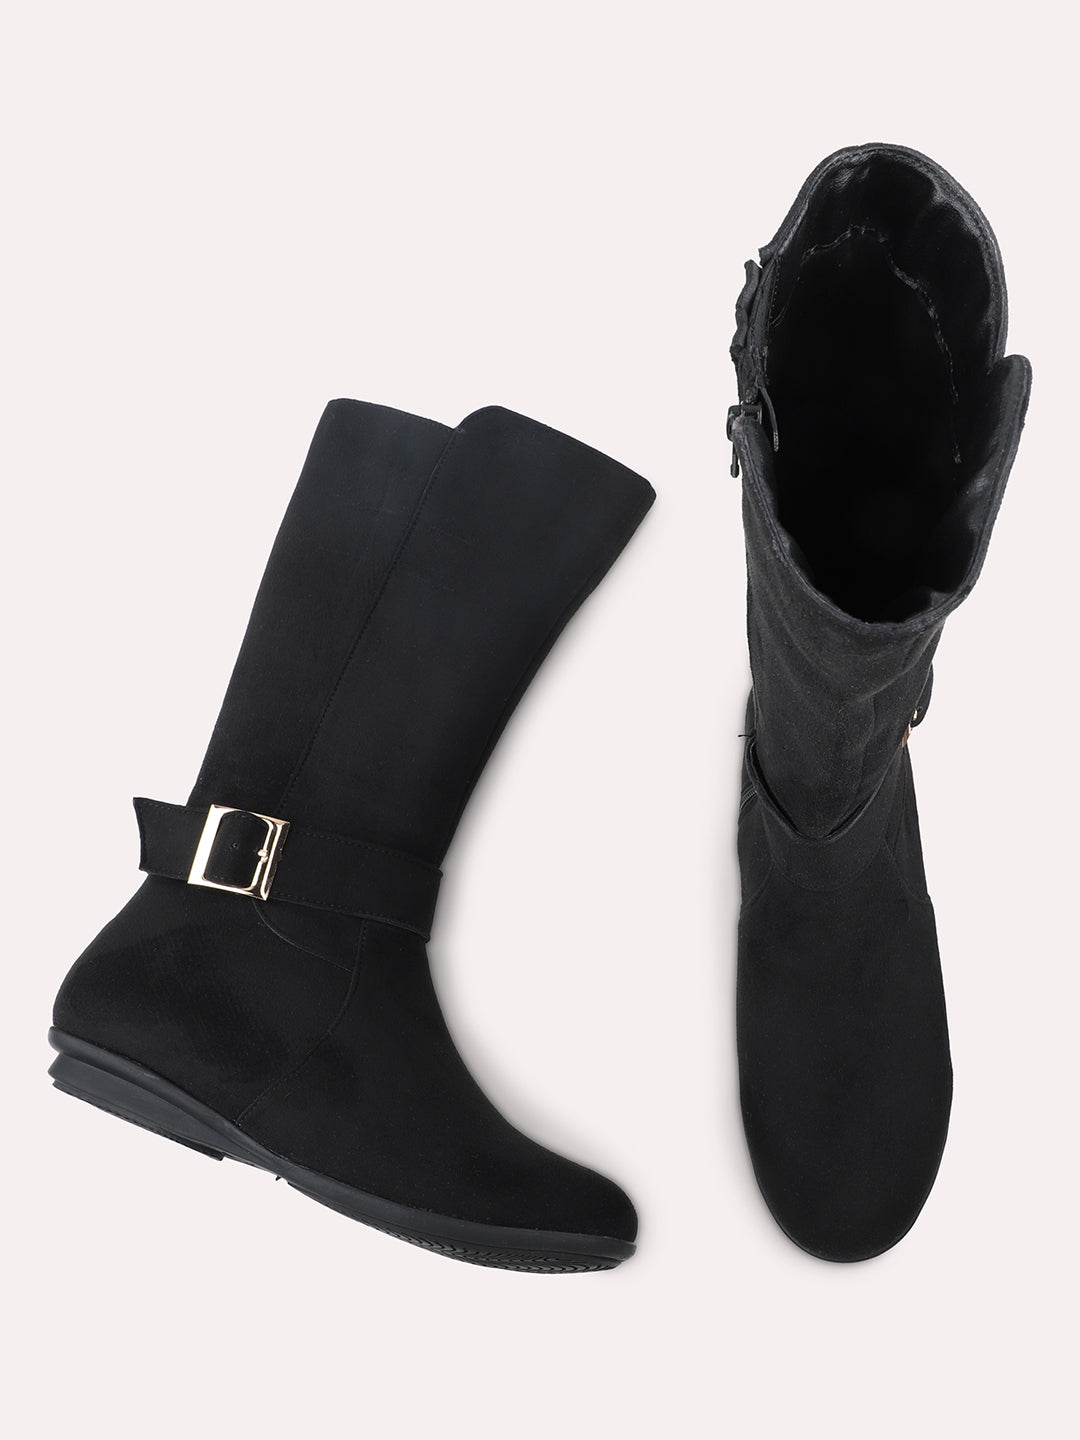 Women Black Knee High Boots With Buckle Detail